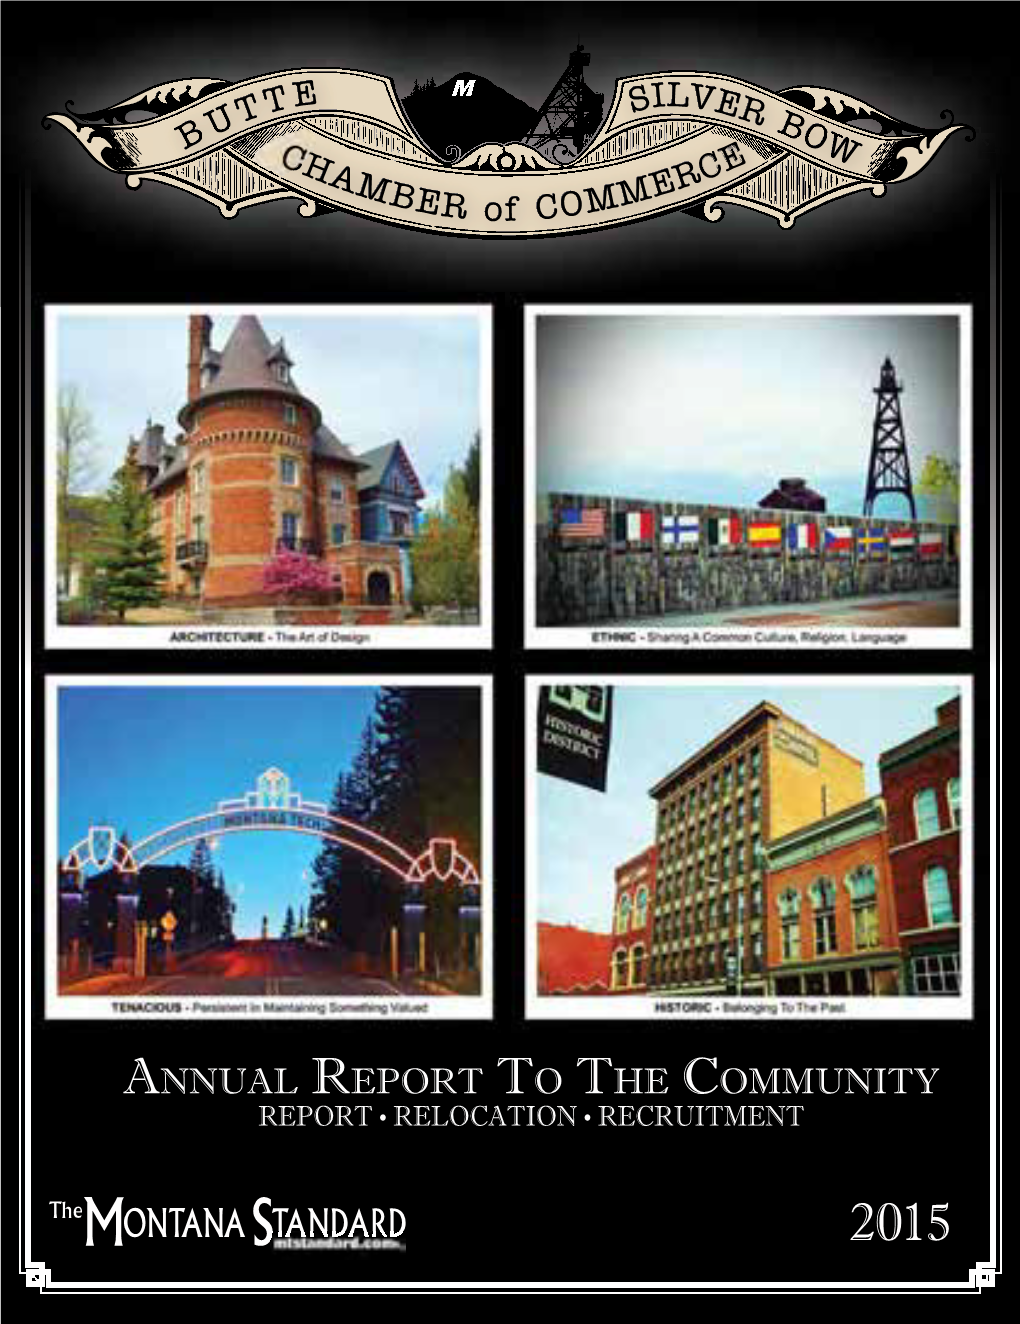 Butte-Silver Bow Chamber of Commerce Annual Report to the Community